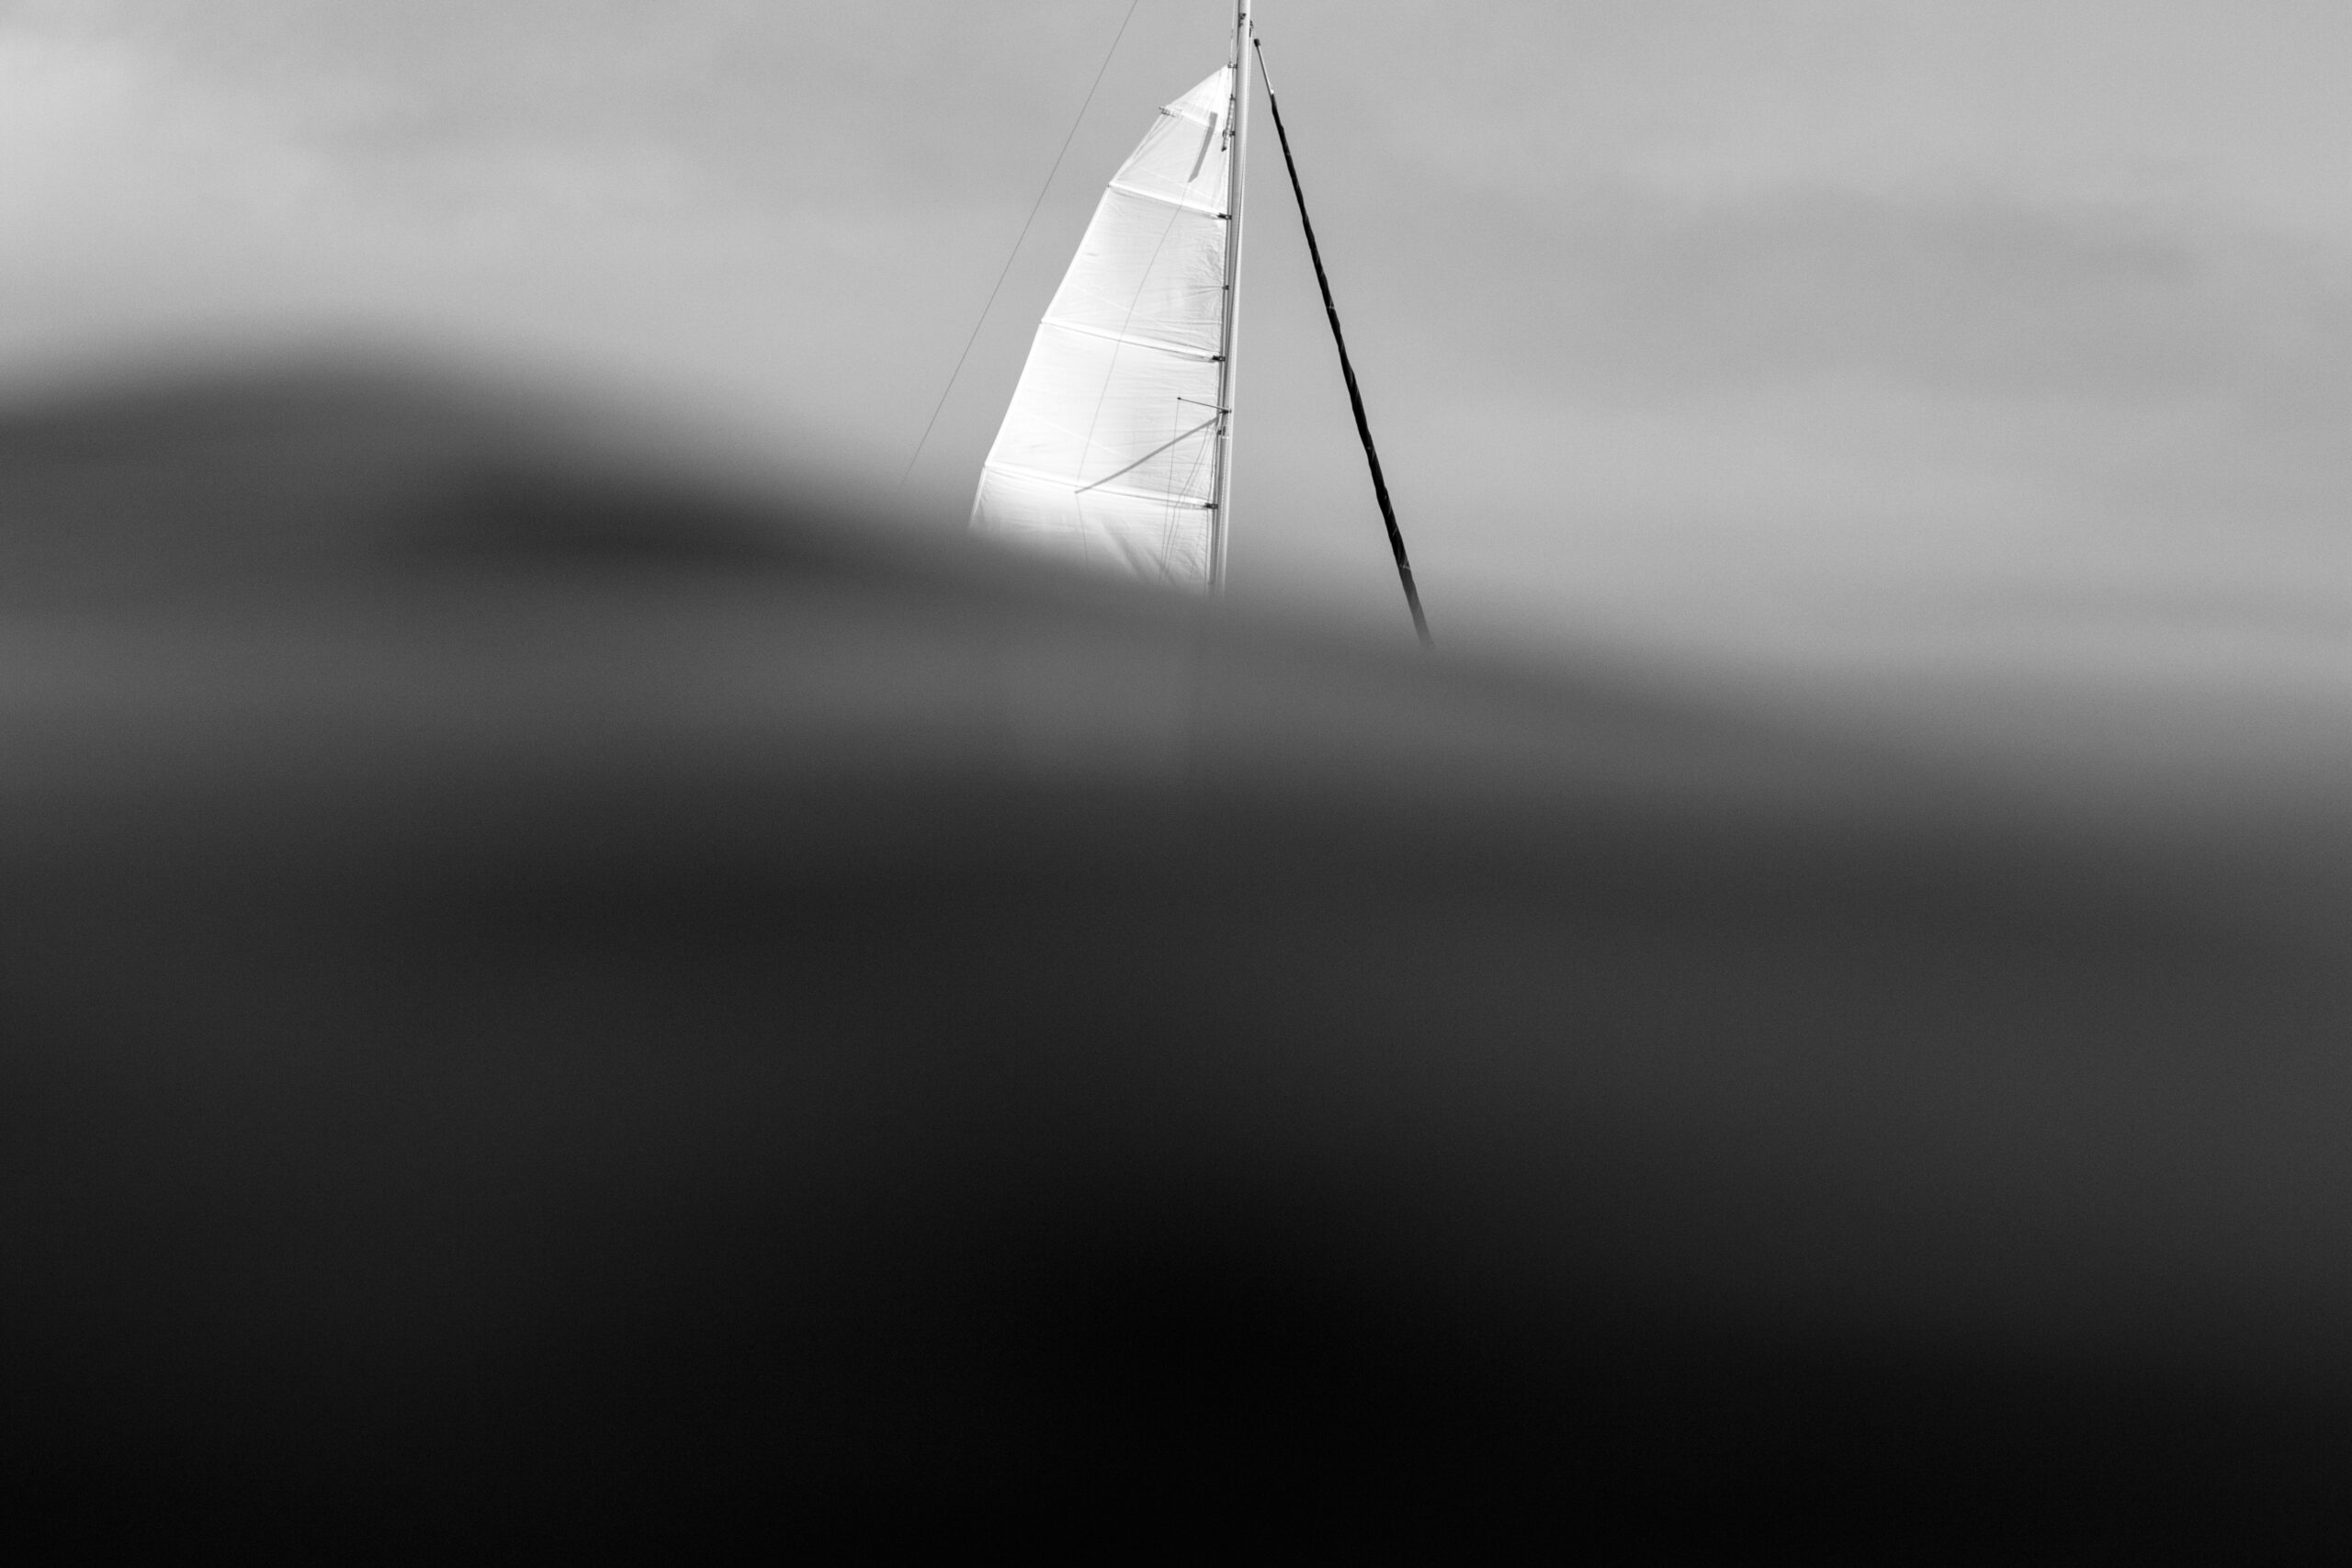 A feature image showing a sailing boat. Acts as an introduction picture to the Project Management Page.